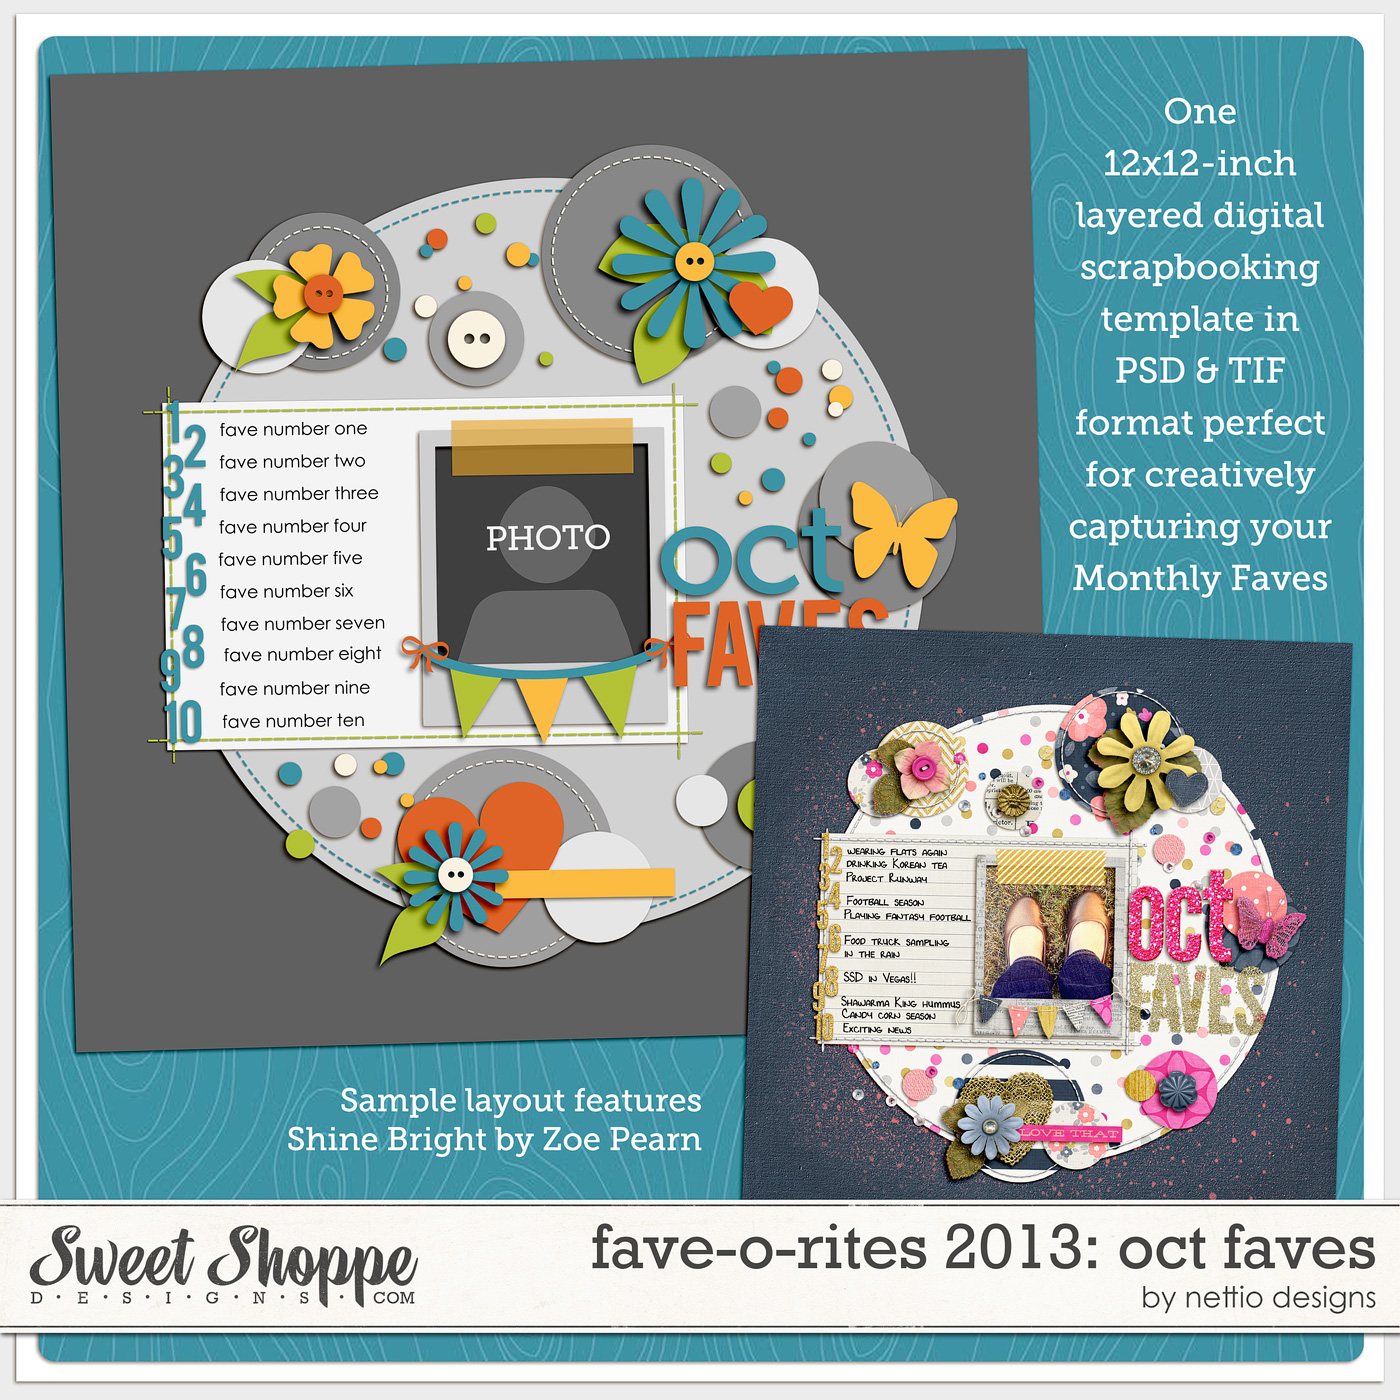 nettiodesigns_FAVE-O-RITES2013_10OctFaves-preview-1400